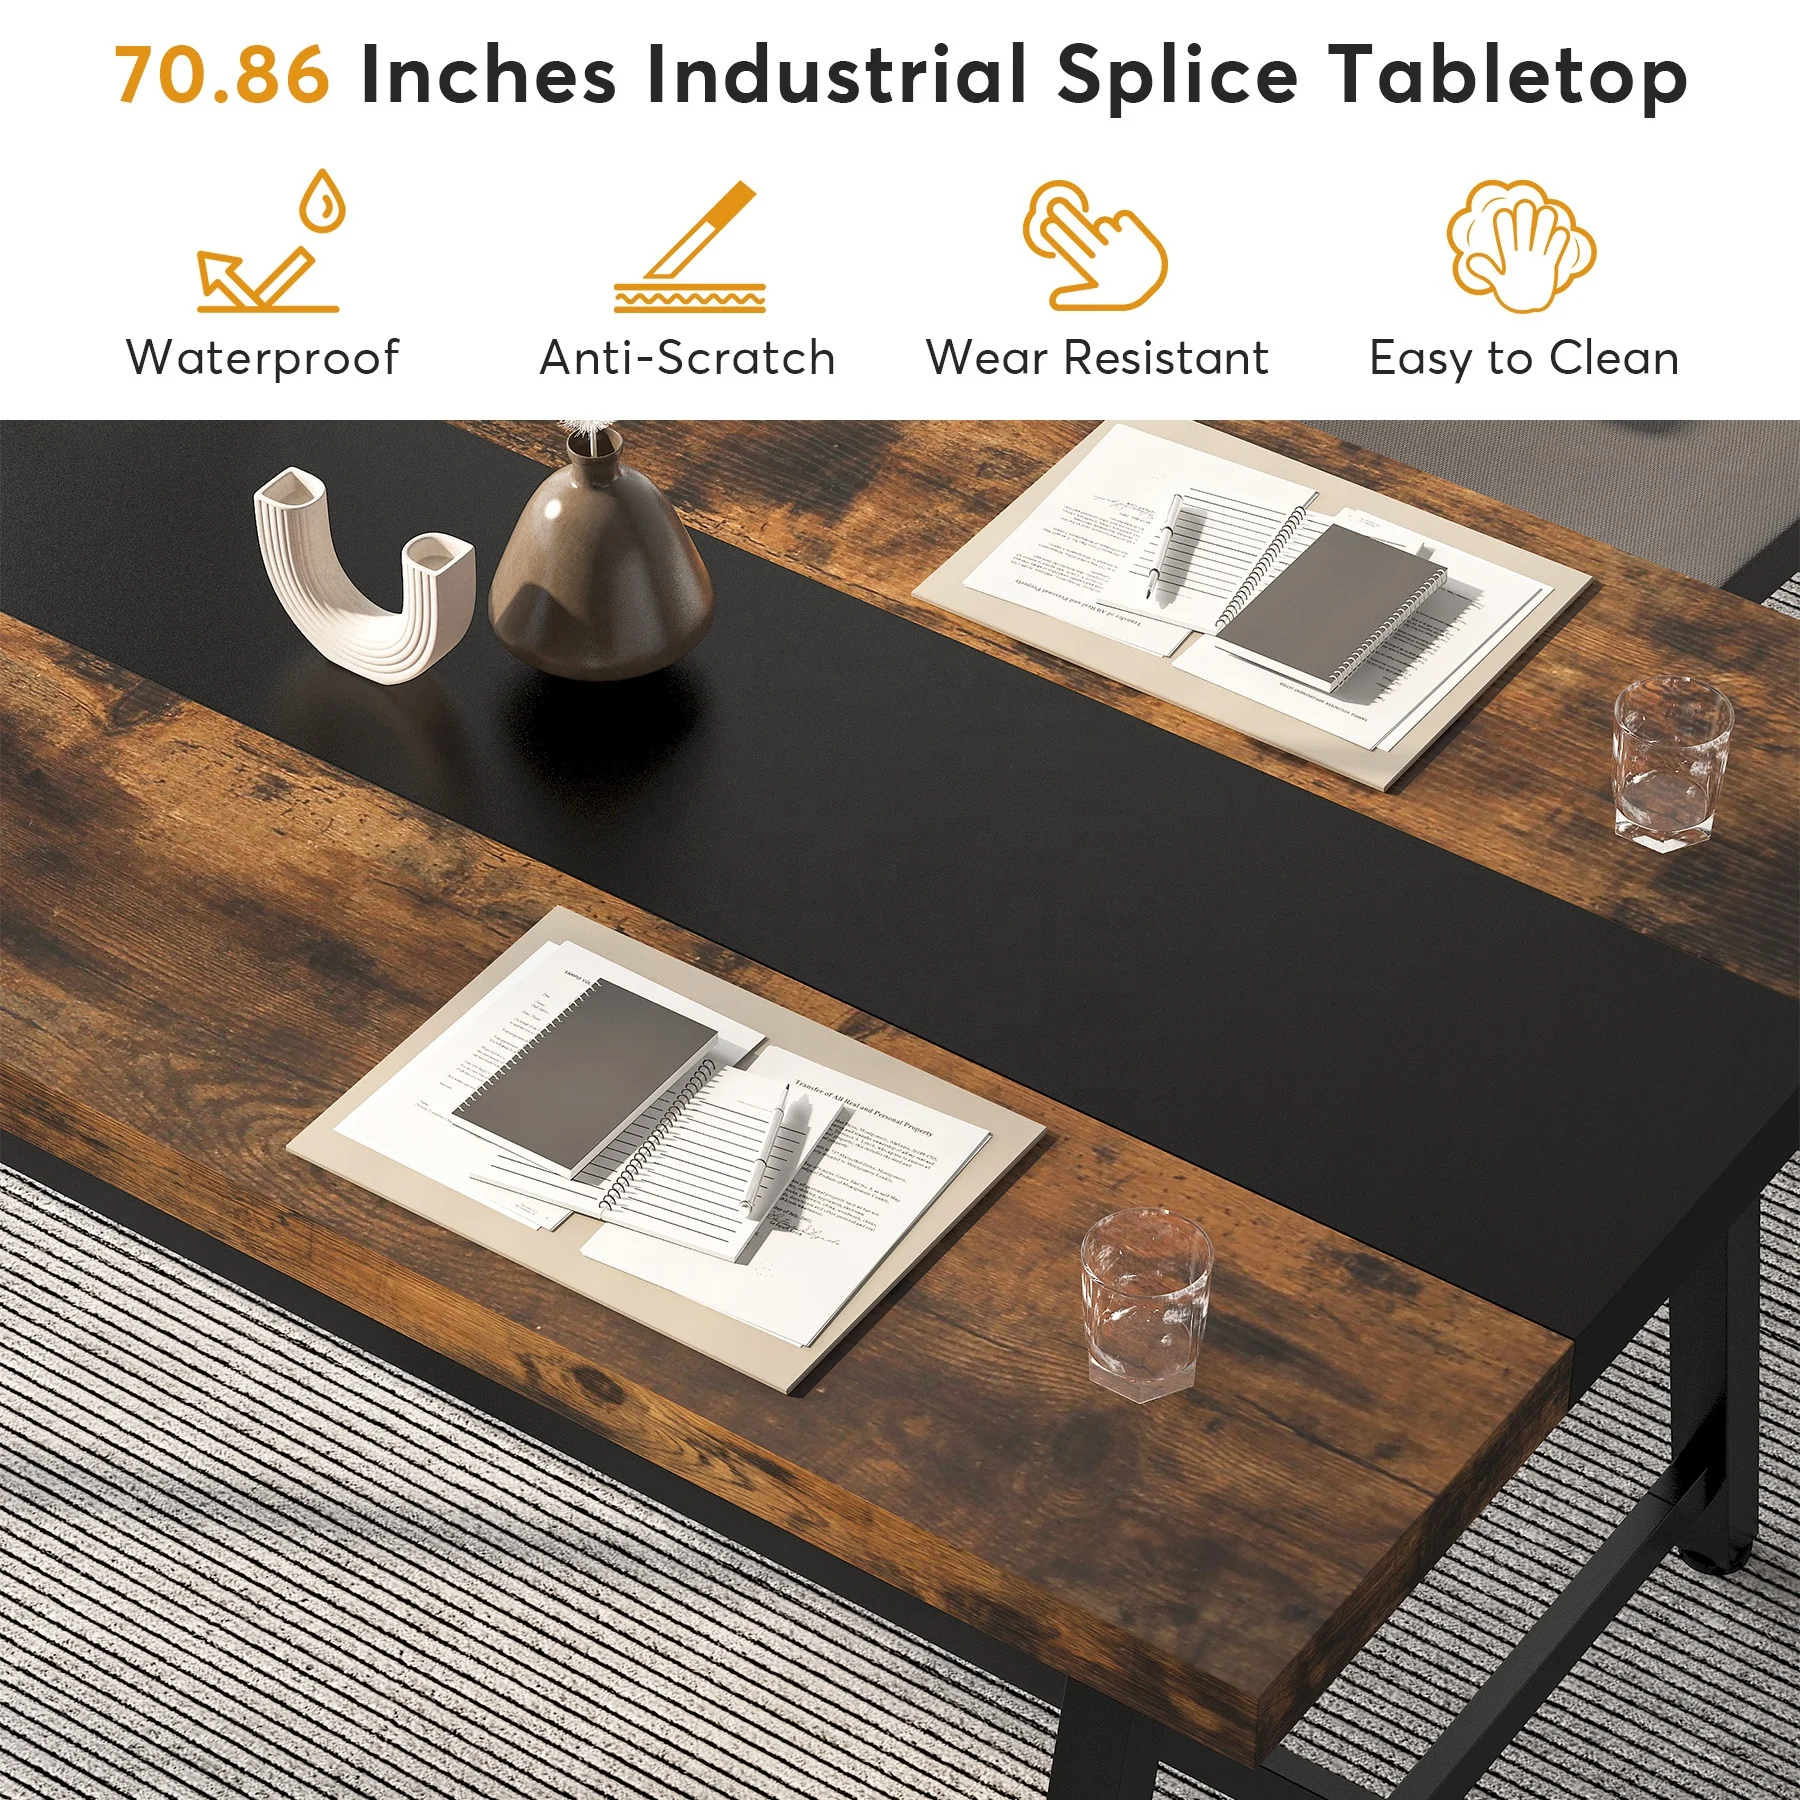 Tribesigns Rectangle Conference Meeting Office Executive Desk Table for Conference Room home furniture